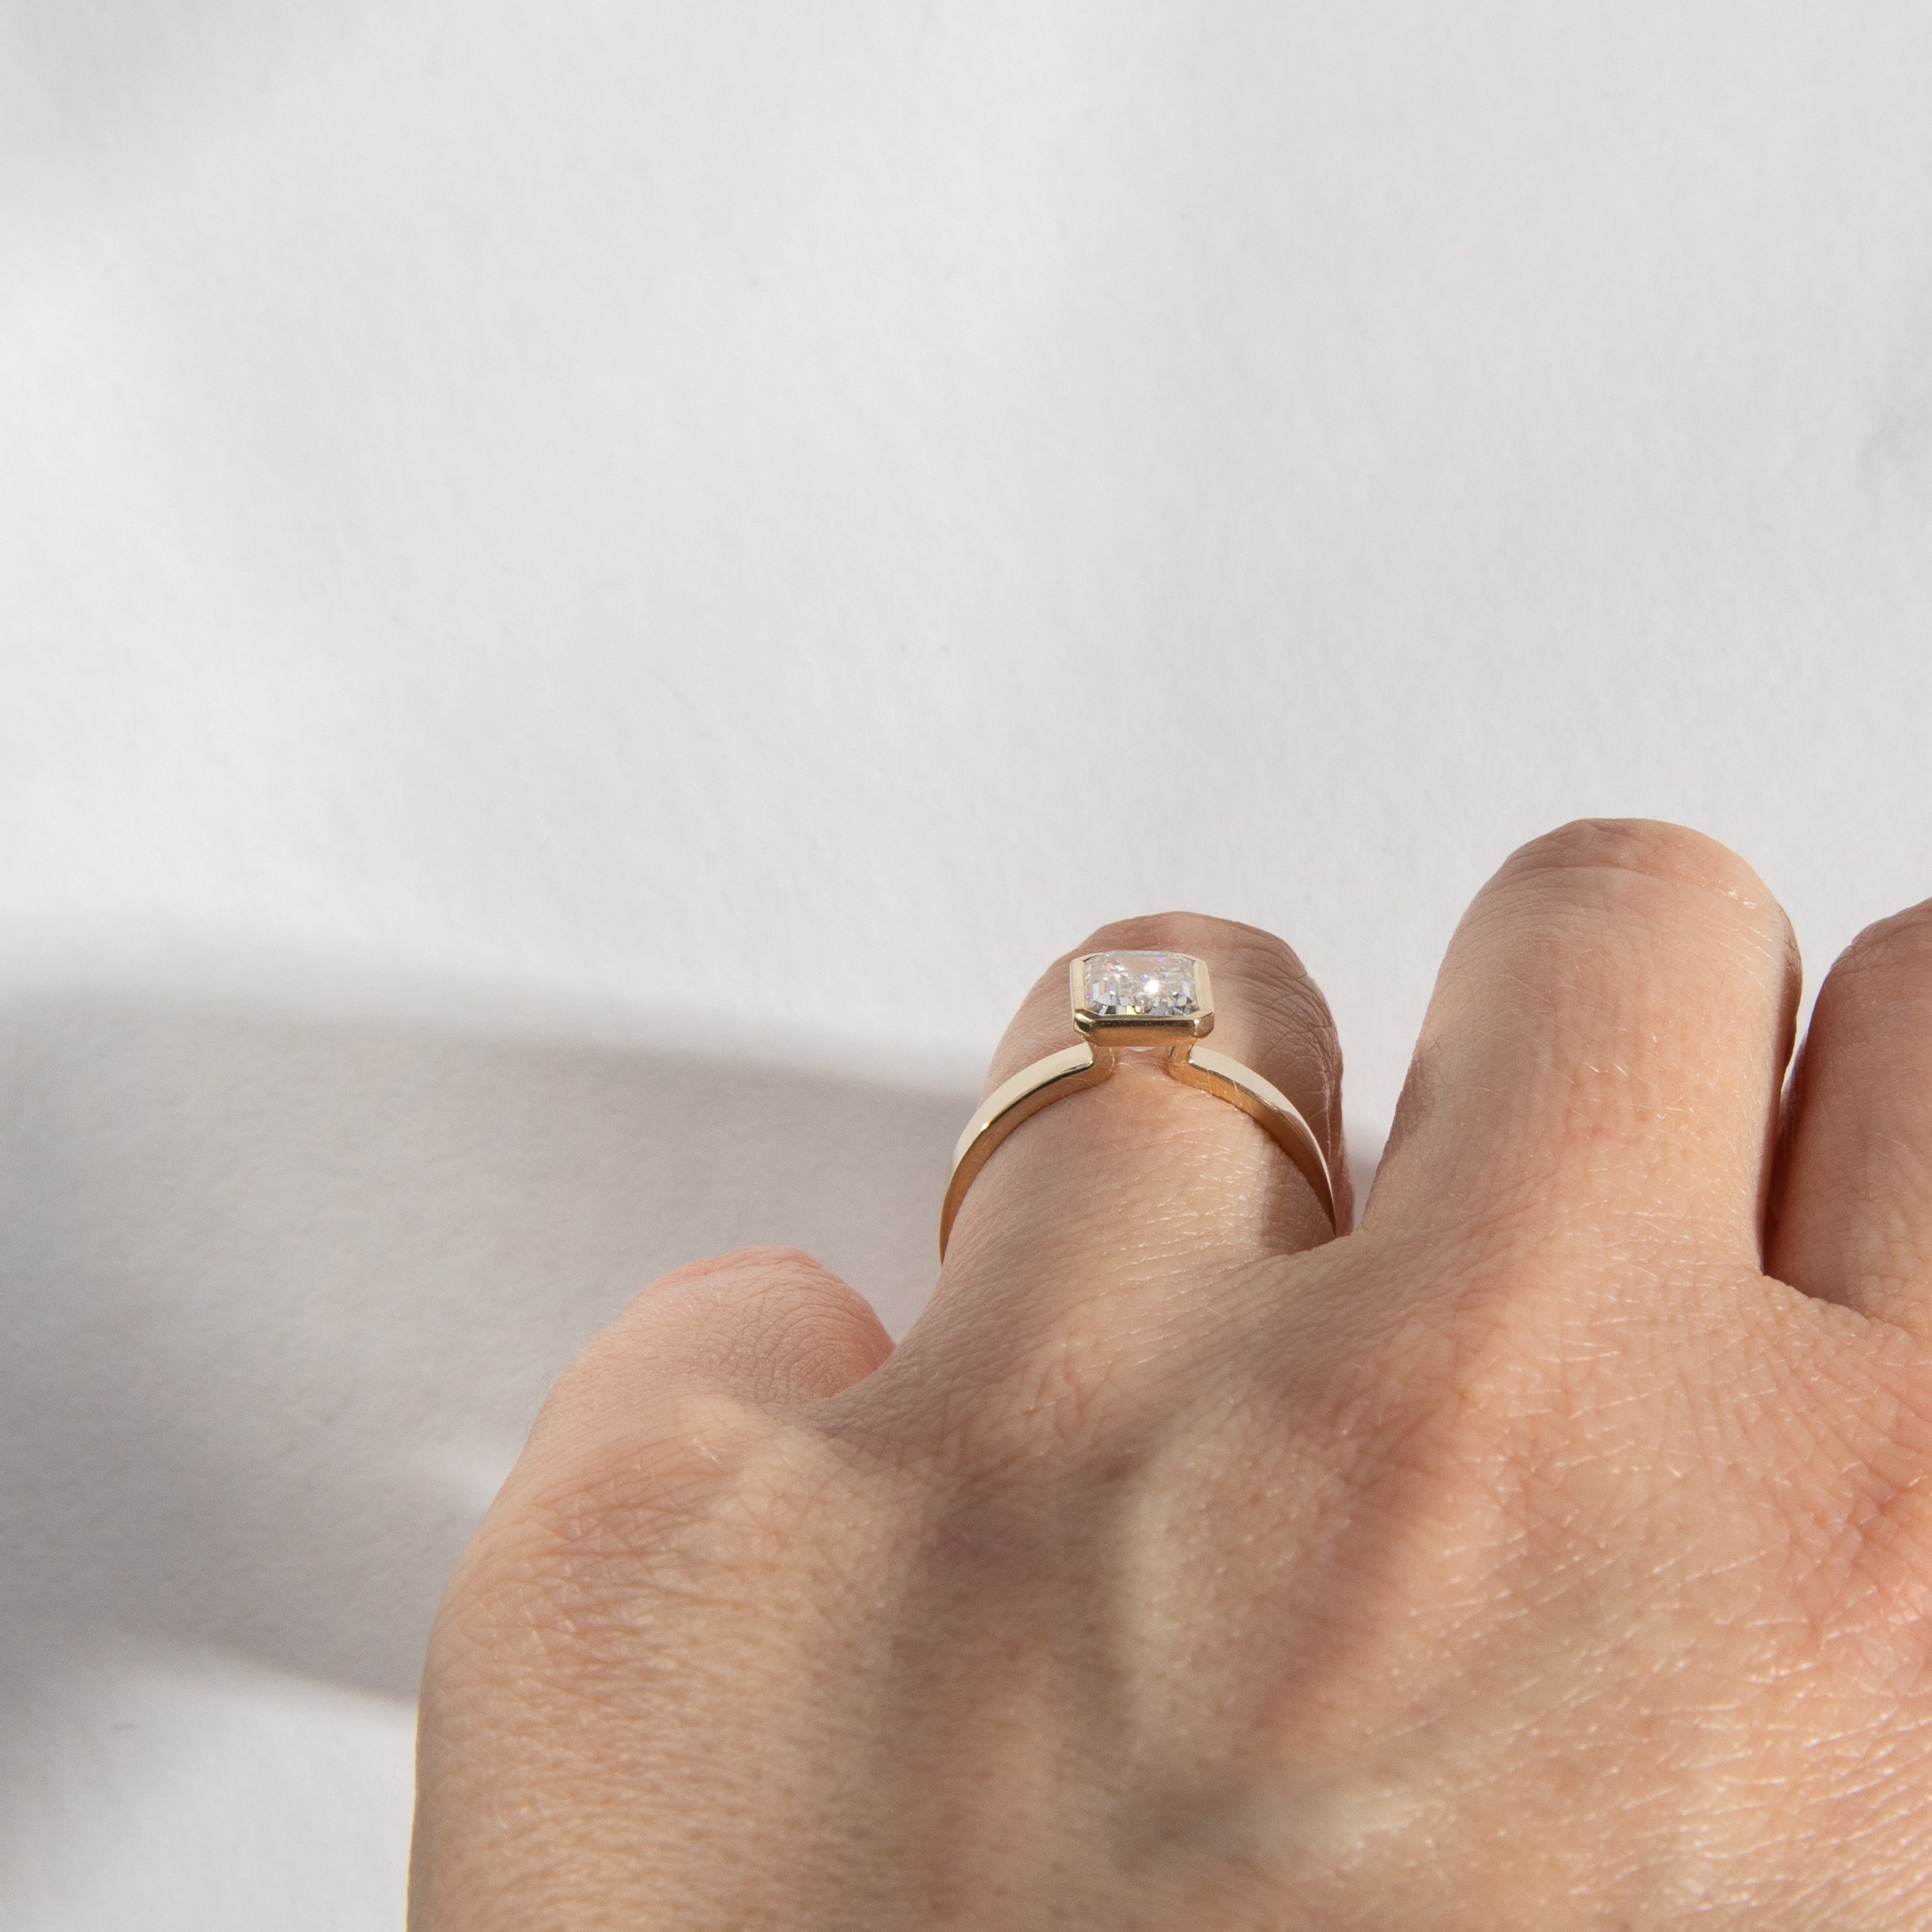 Badi Stackable ring in 14k Yellow Gold set with a lab-grown diamond